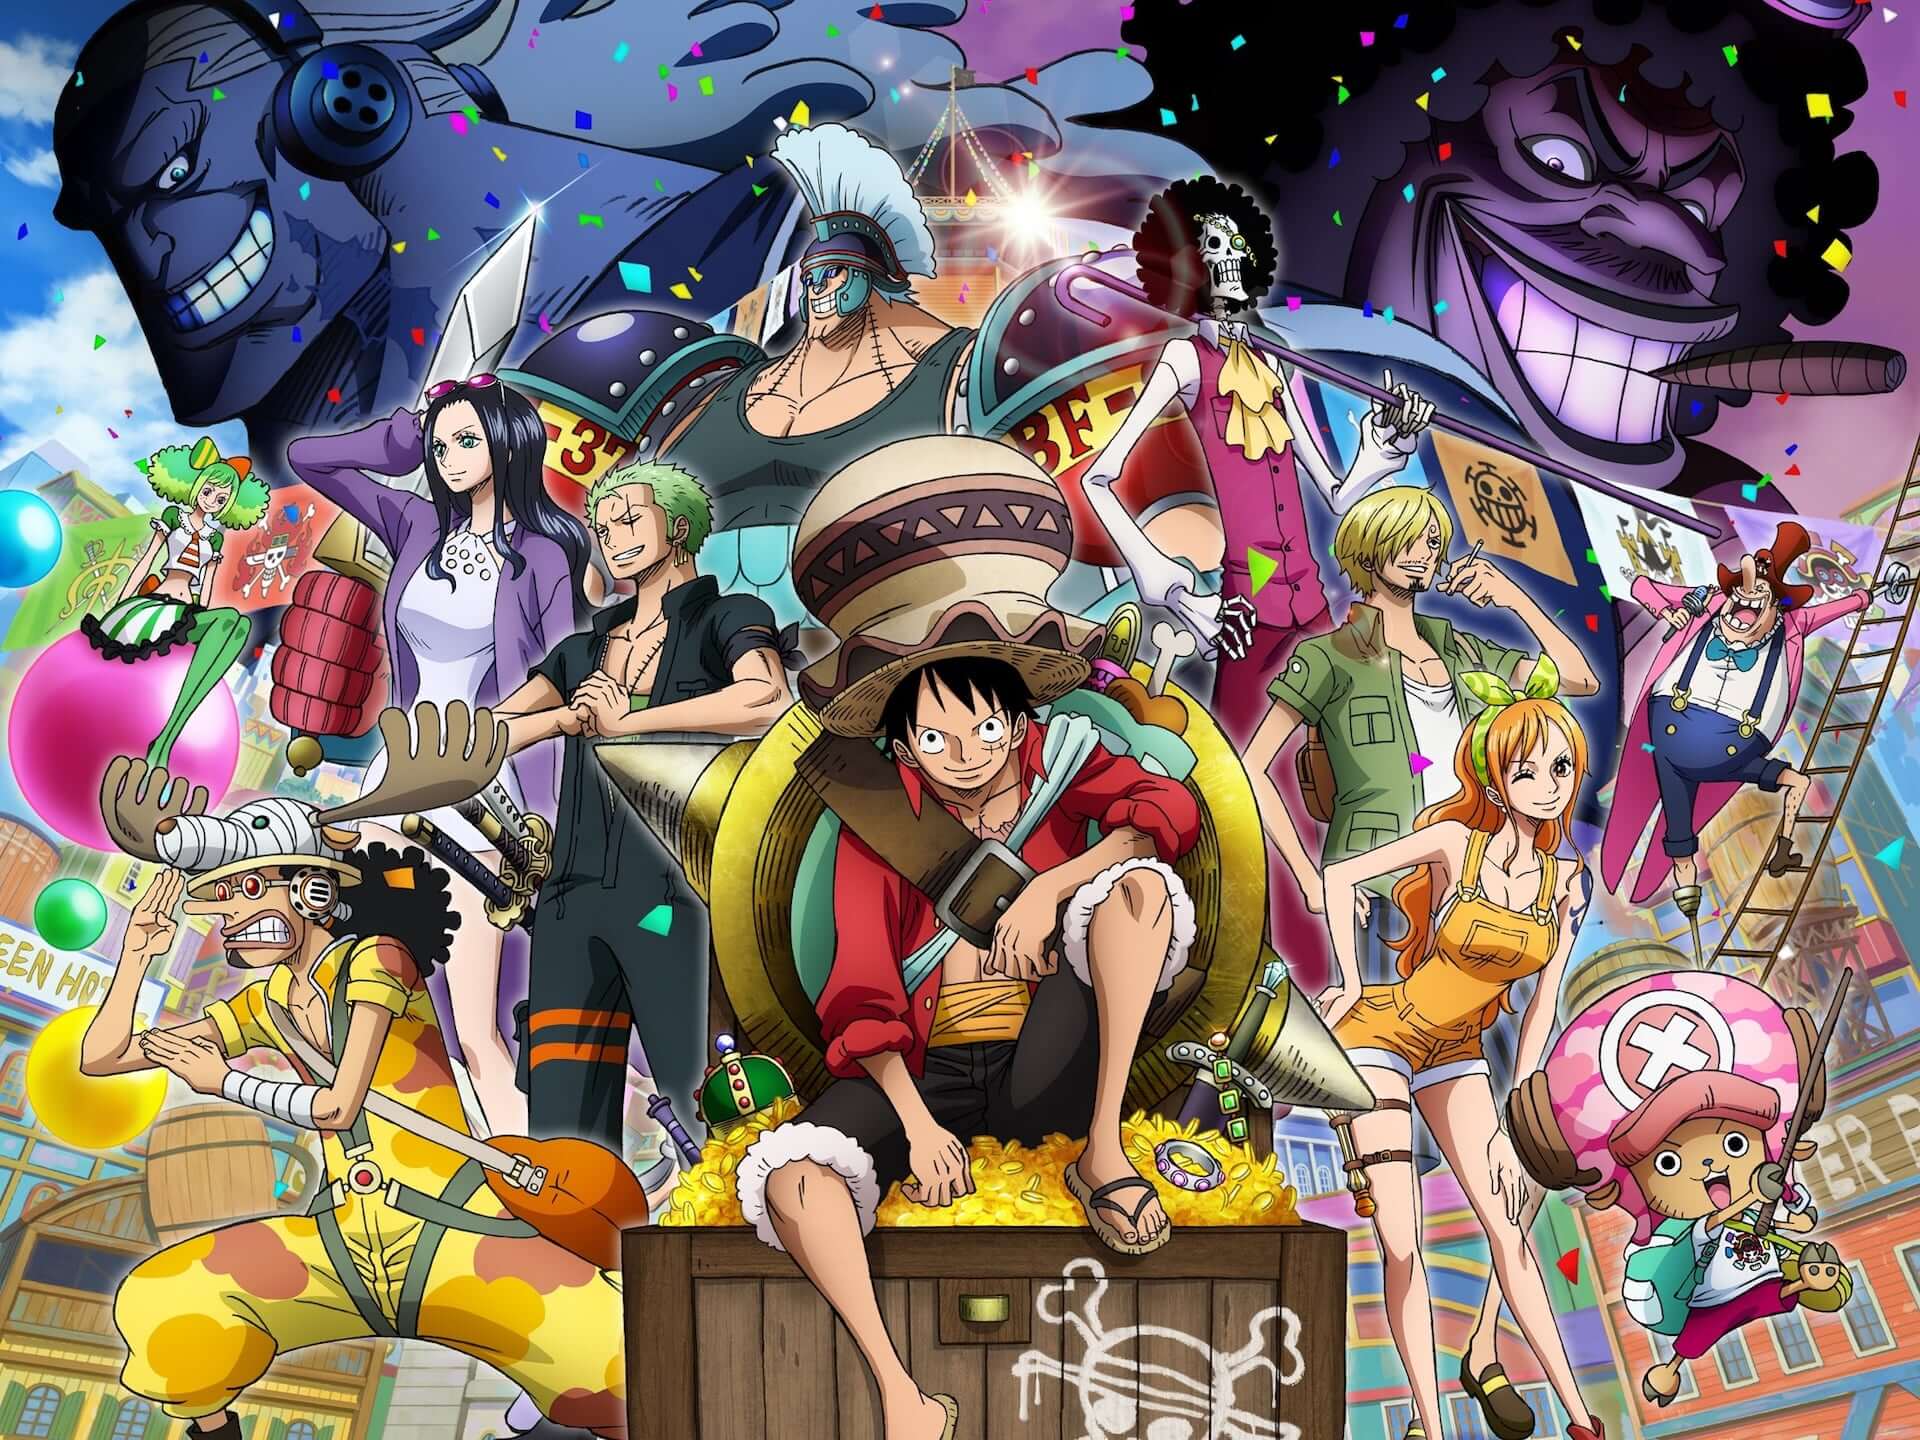 『ONE PIECE STAMPEDE』興収50億突破に尾田栄一郎喜び爆発「50億突破！！ですってよー！！」 film190909_onepiece_stampede_2-1920x1440